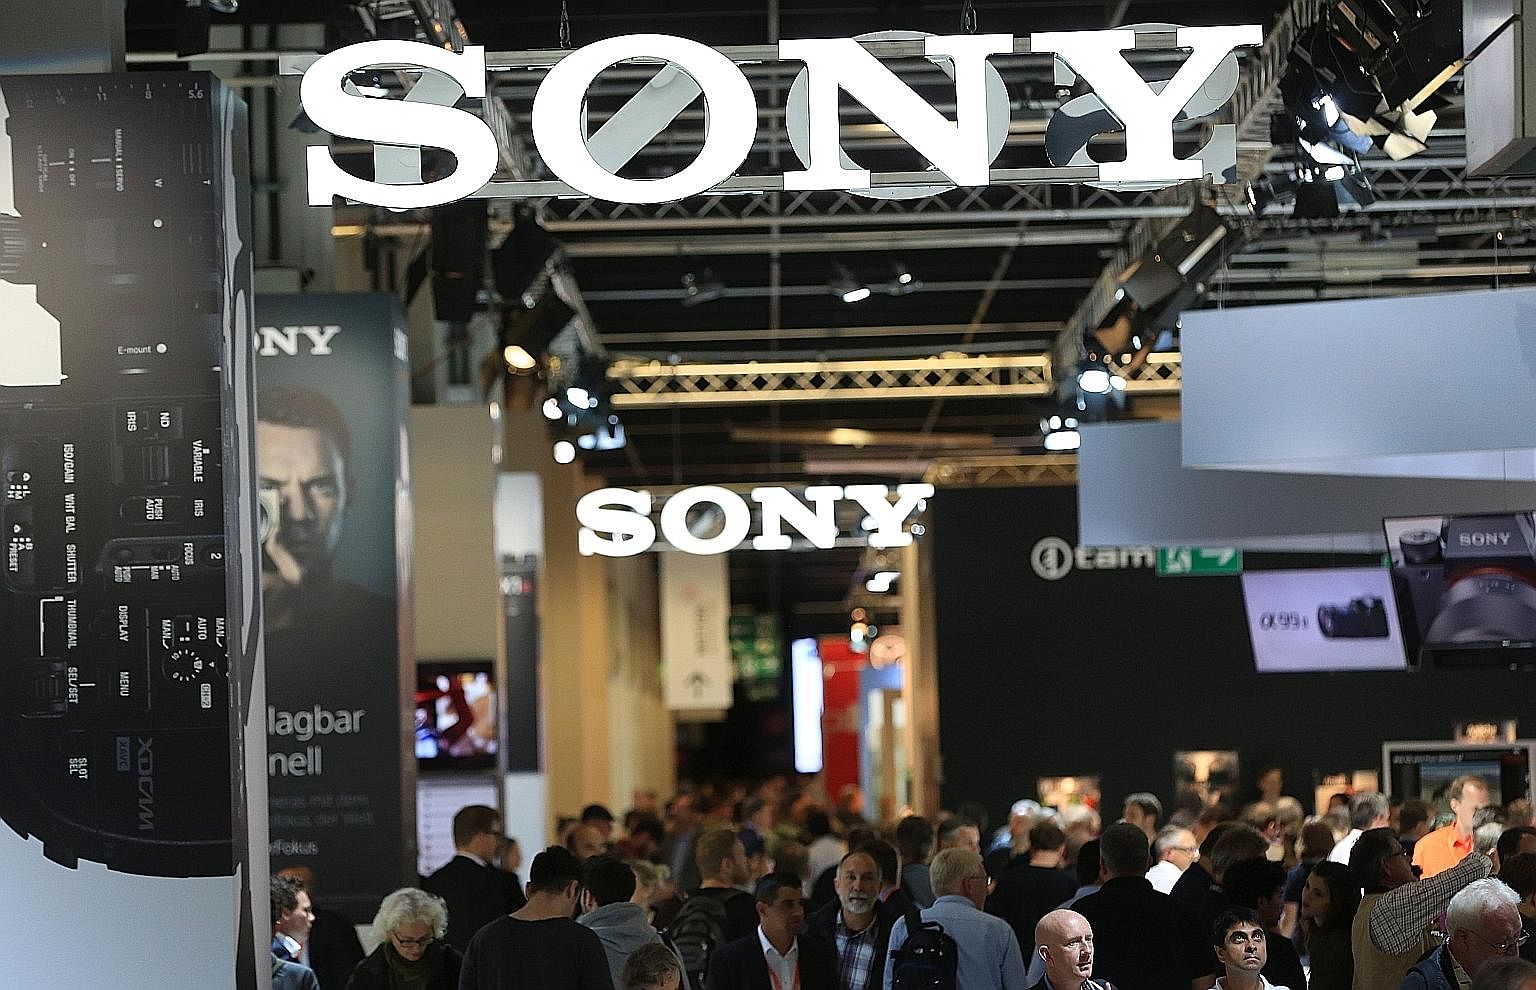 Visitors browsing a display containing a selection of Canon camera lenses during the Photokina photography trade fair in Cologne on Sept 20. At the Photokina photography trade fair, Sony unveiled&#97; the the &#97;99 II, the long-awaited successor to